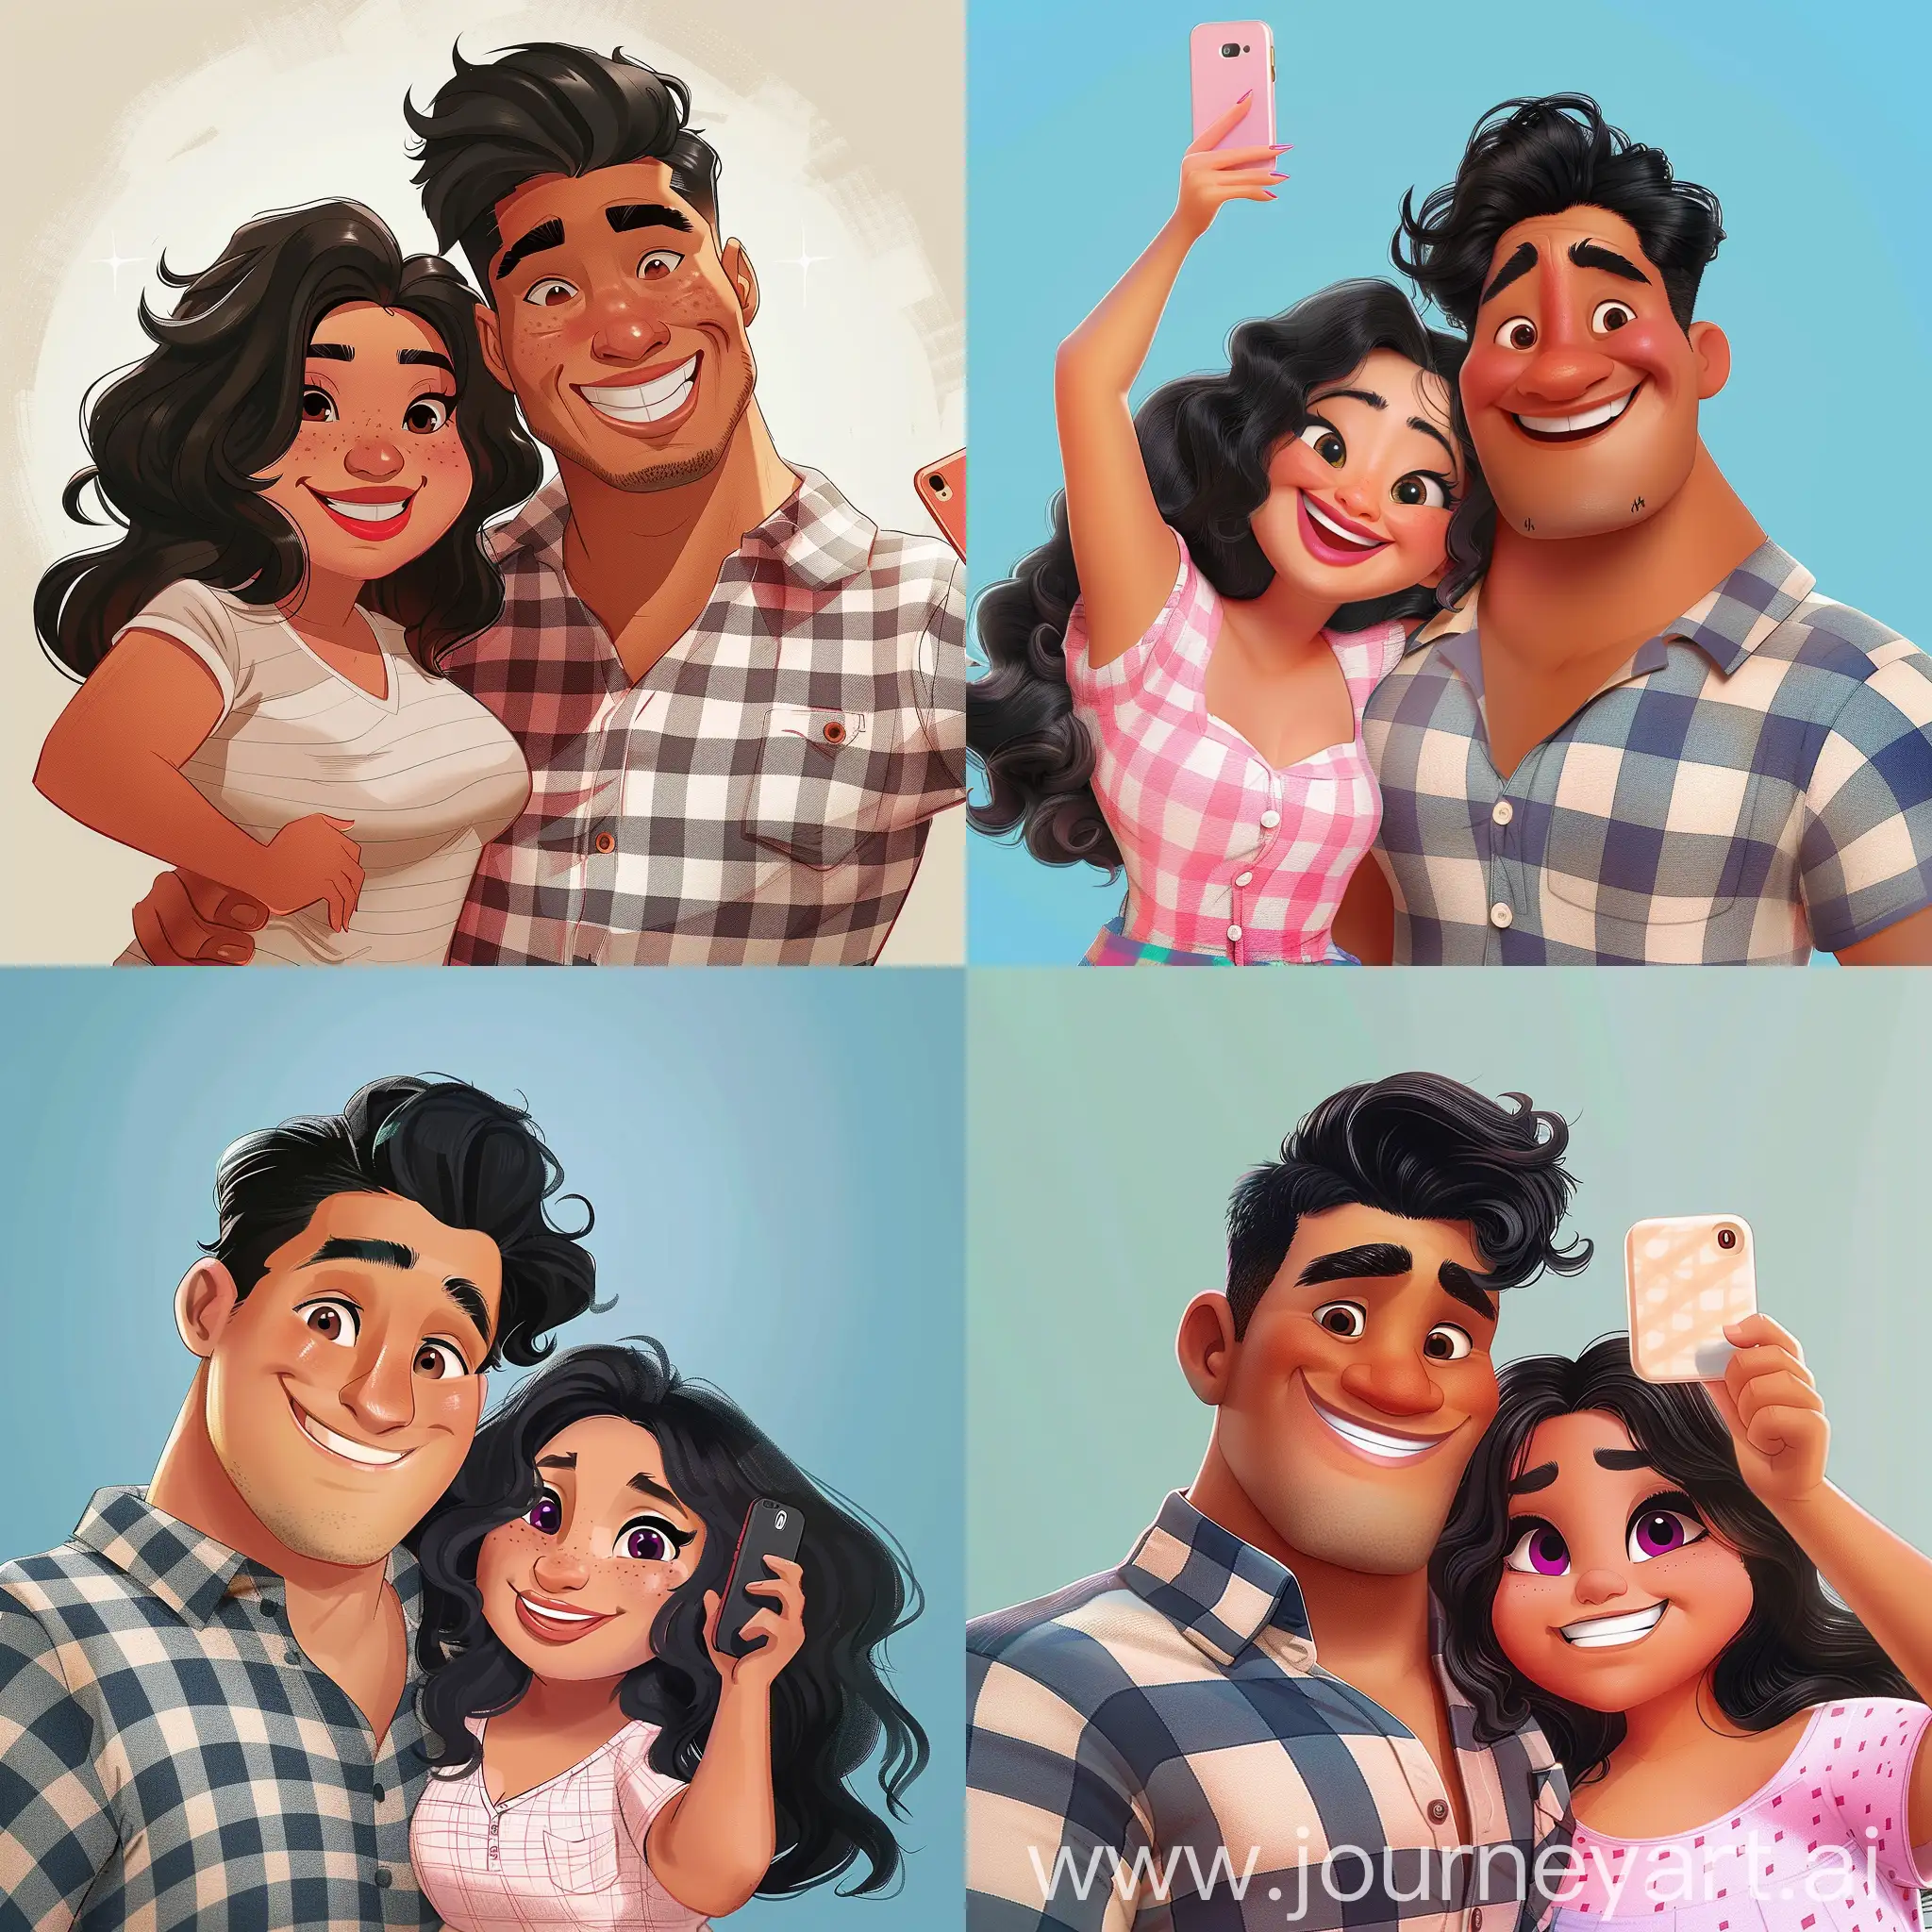 make a cartoon character of a guy with dusky skin tone, clean shaved, wavy dark voluminous hair, plumy lips, checks shirt, smiling, taking a selfie with a chubby girl, wavy layer hair